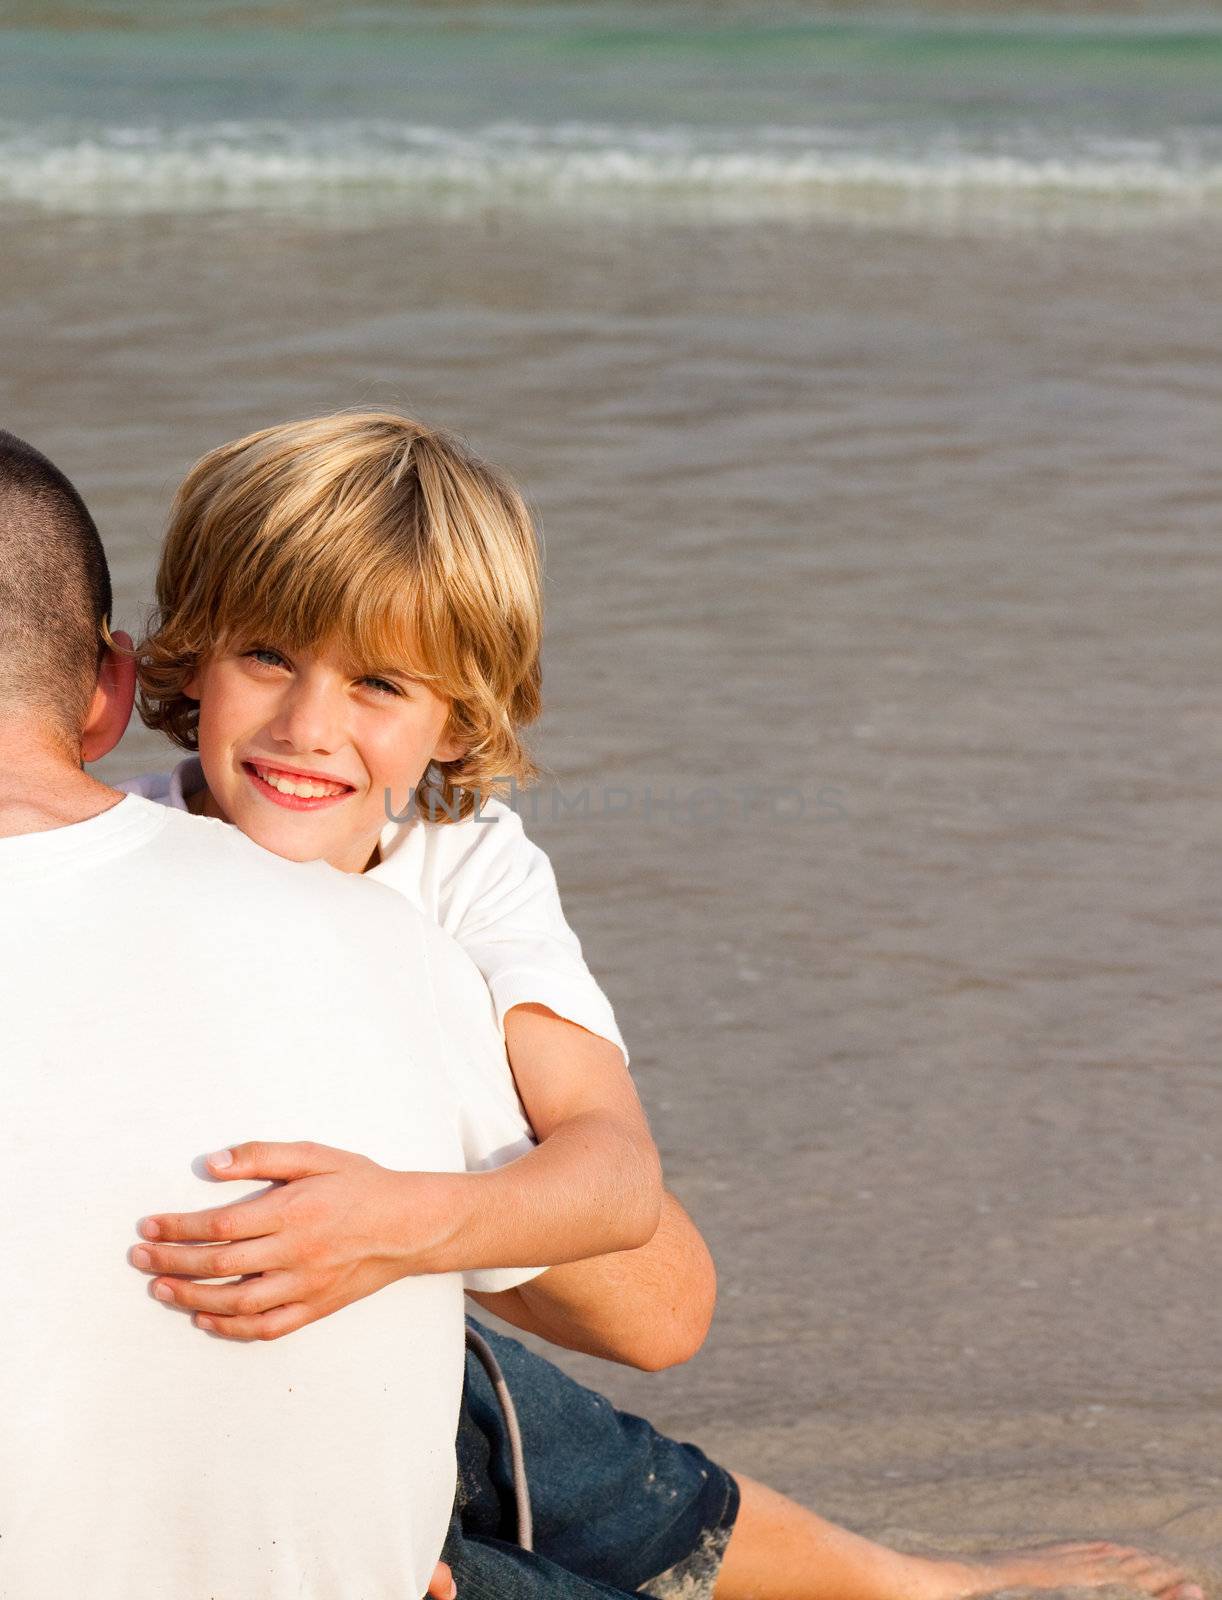 Blond boy and his father on a beach by Wavebreakmedia